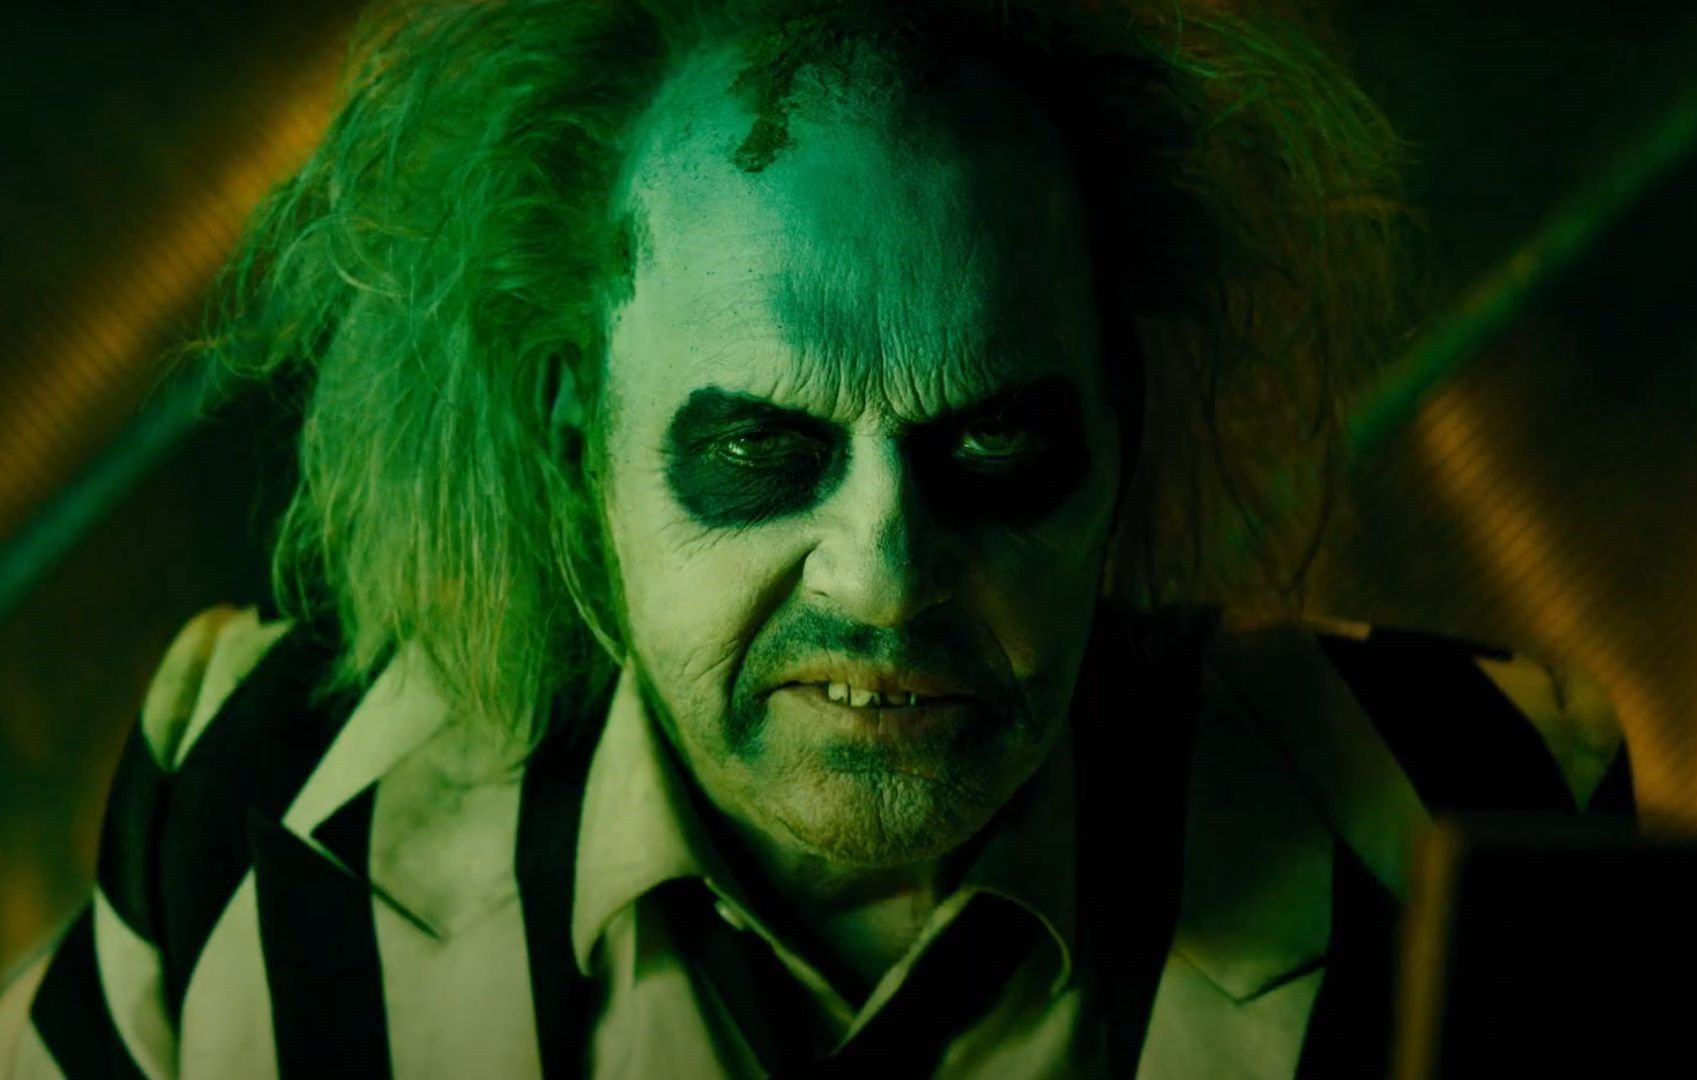 'Beetlejuice' sequel drops trailer with Michael Keaton, Winona Ryder returning